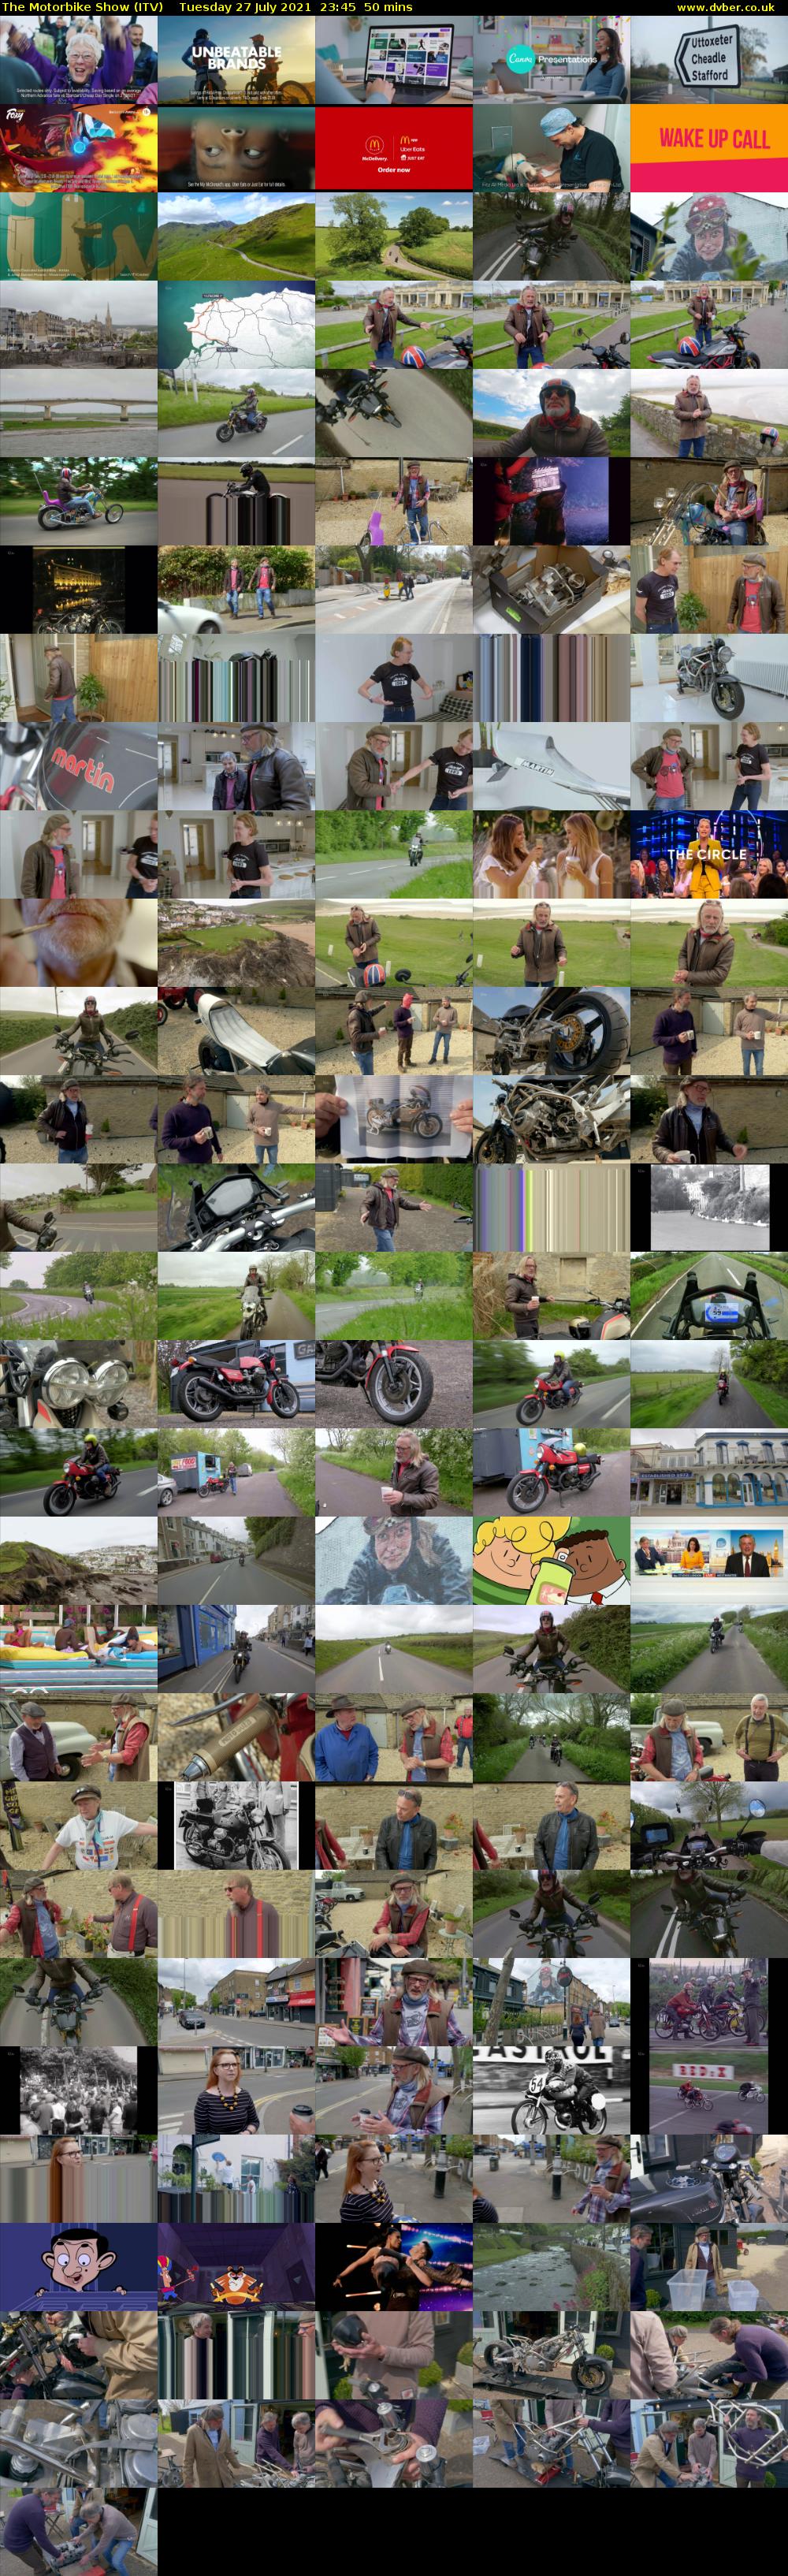 The Motorbike Show (ITV) Tuesday 27 July 2021 23:45 - 00:35